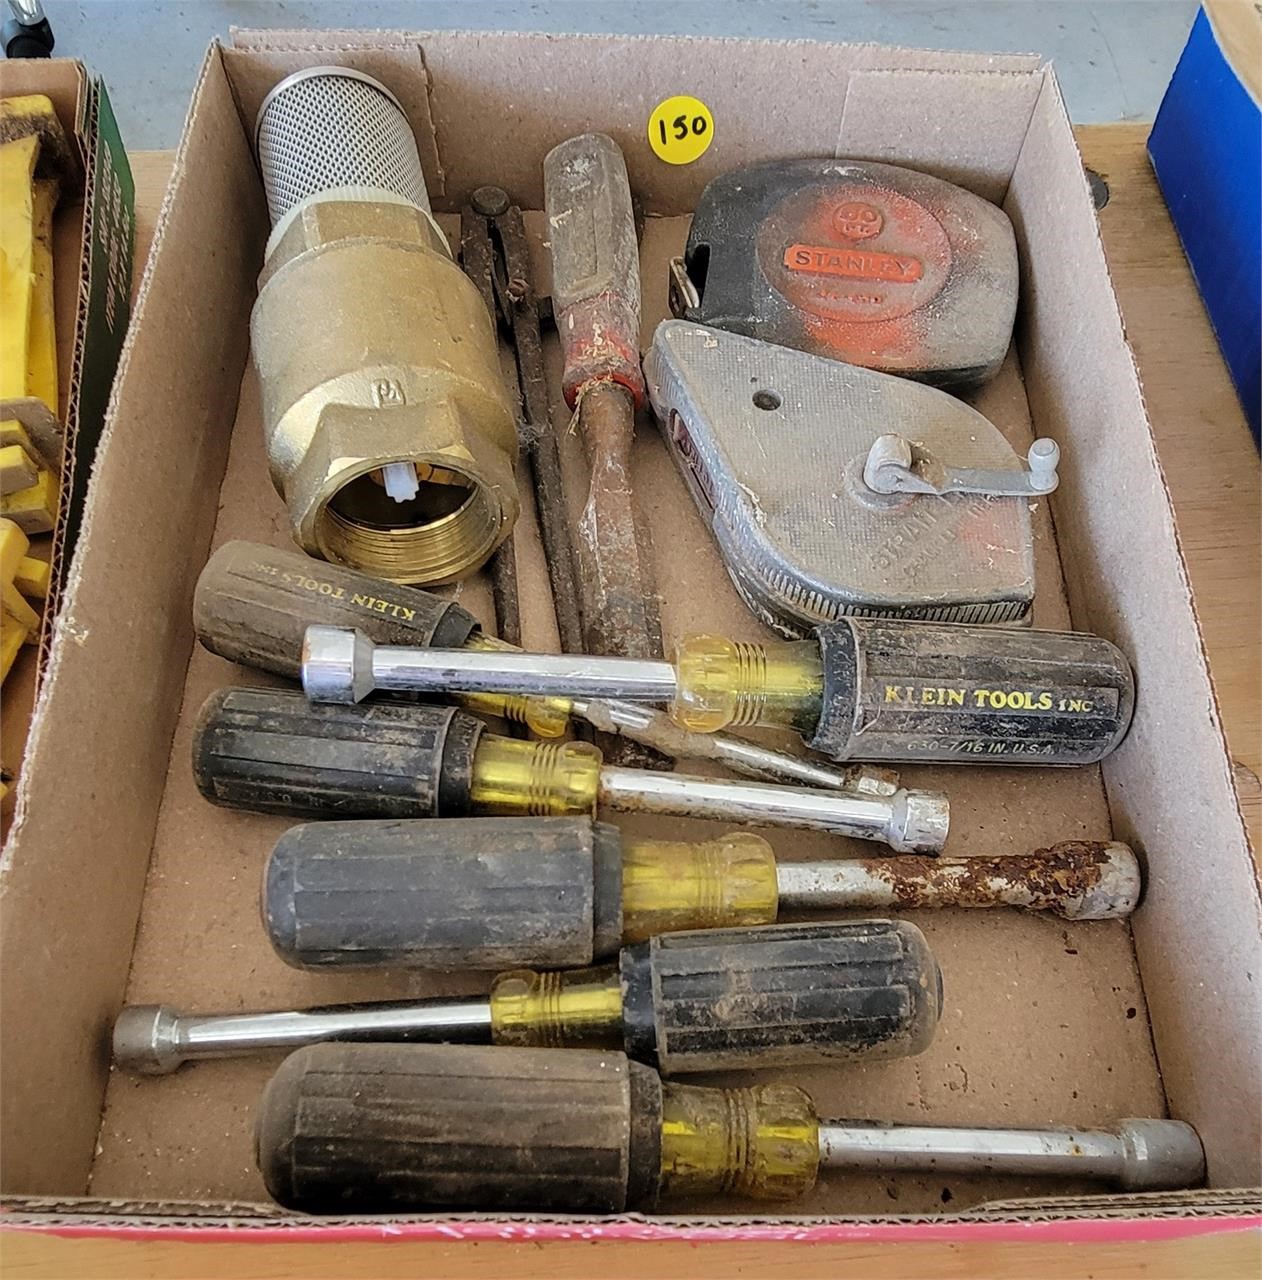 Klein tools and misc.